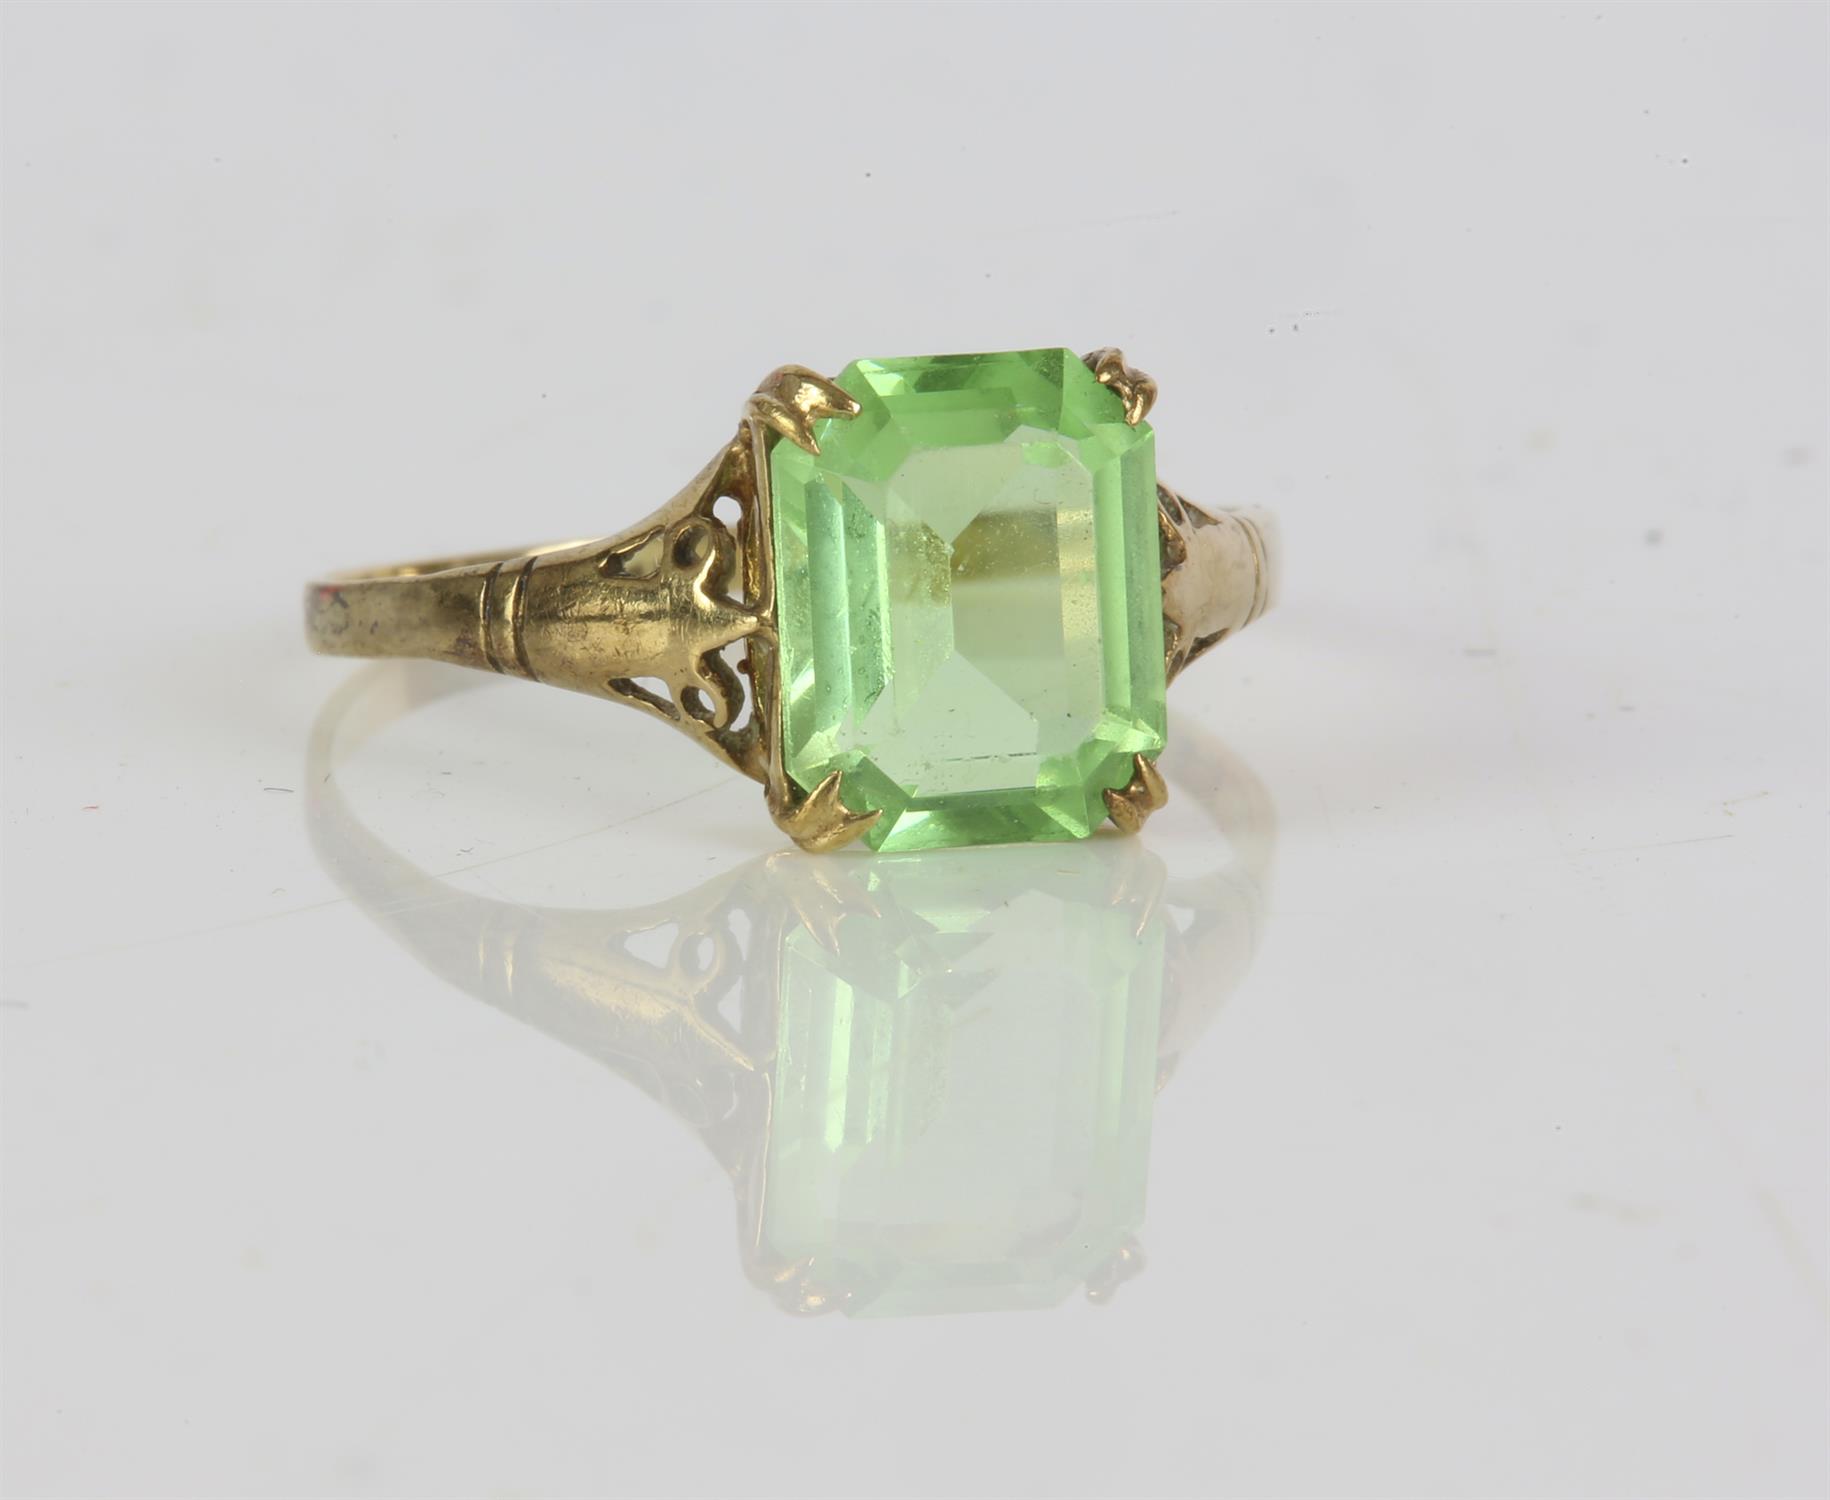 9ct gold ring set with a green natural glass stone, size S½, 1.8 grams